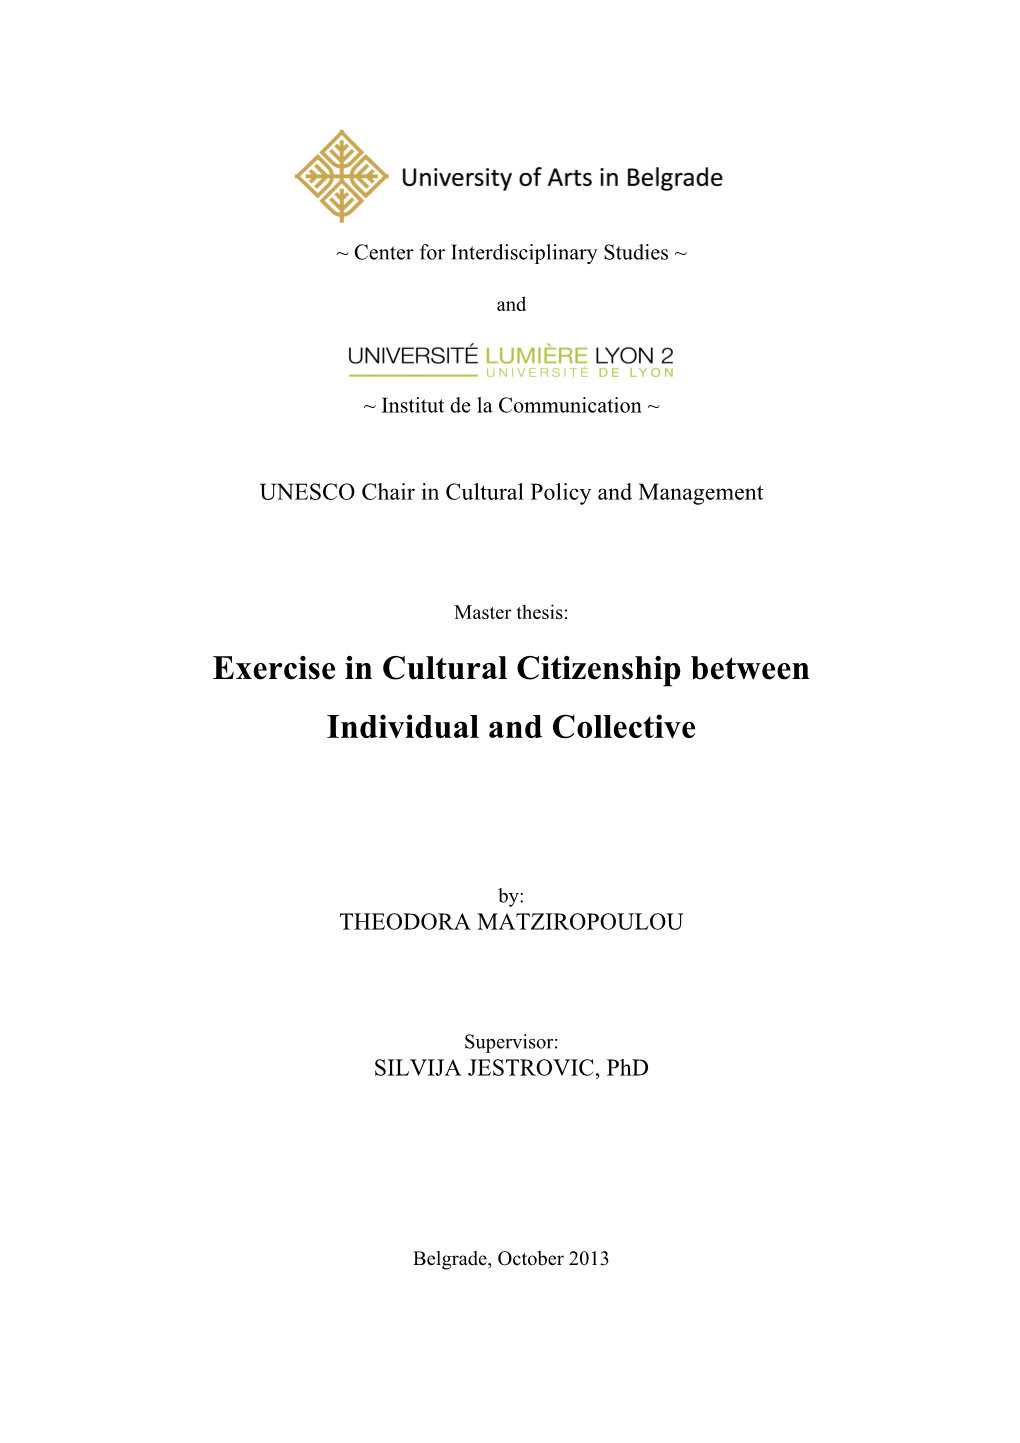 Exercise in Cultural Citizenship Between Individual and Collective